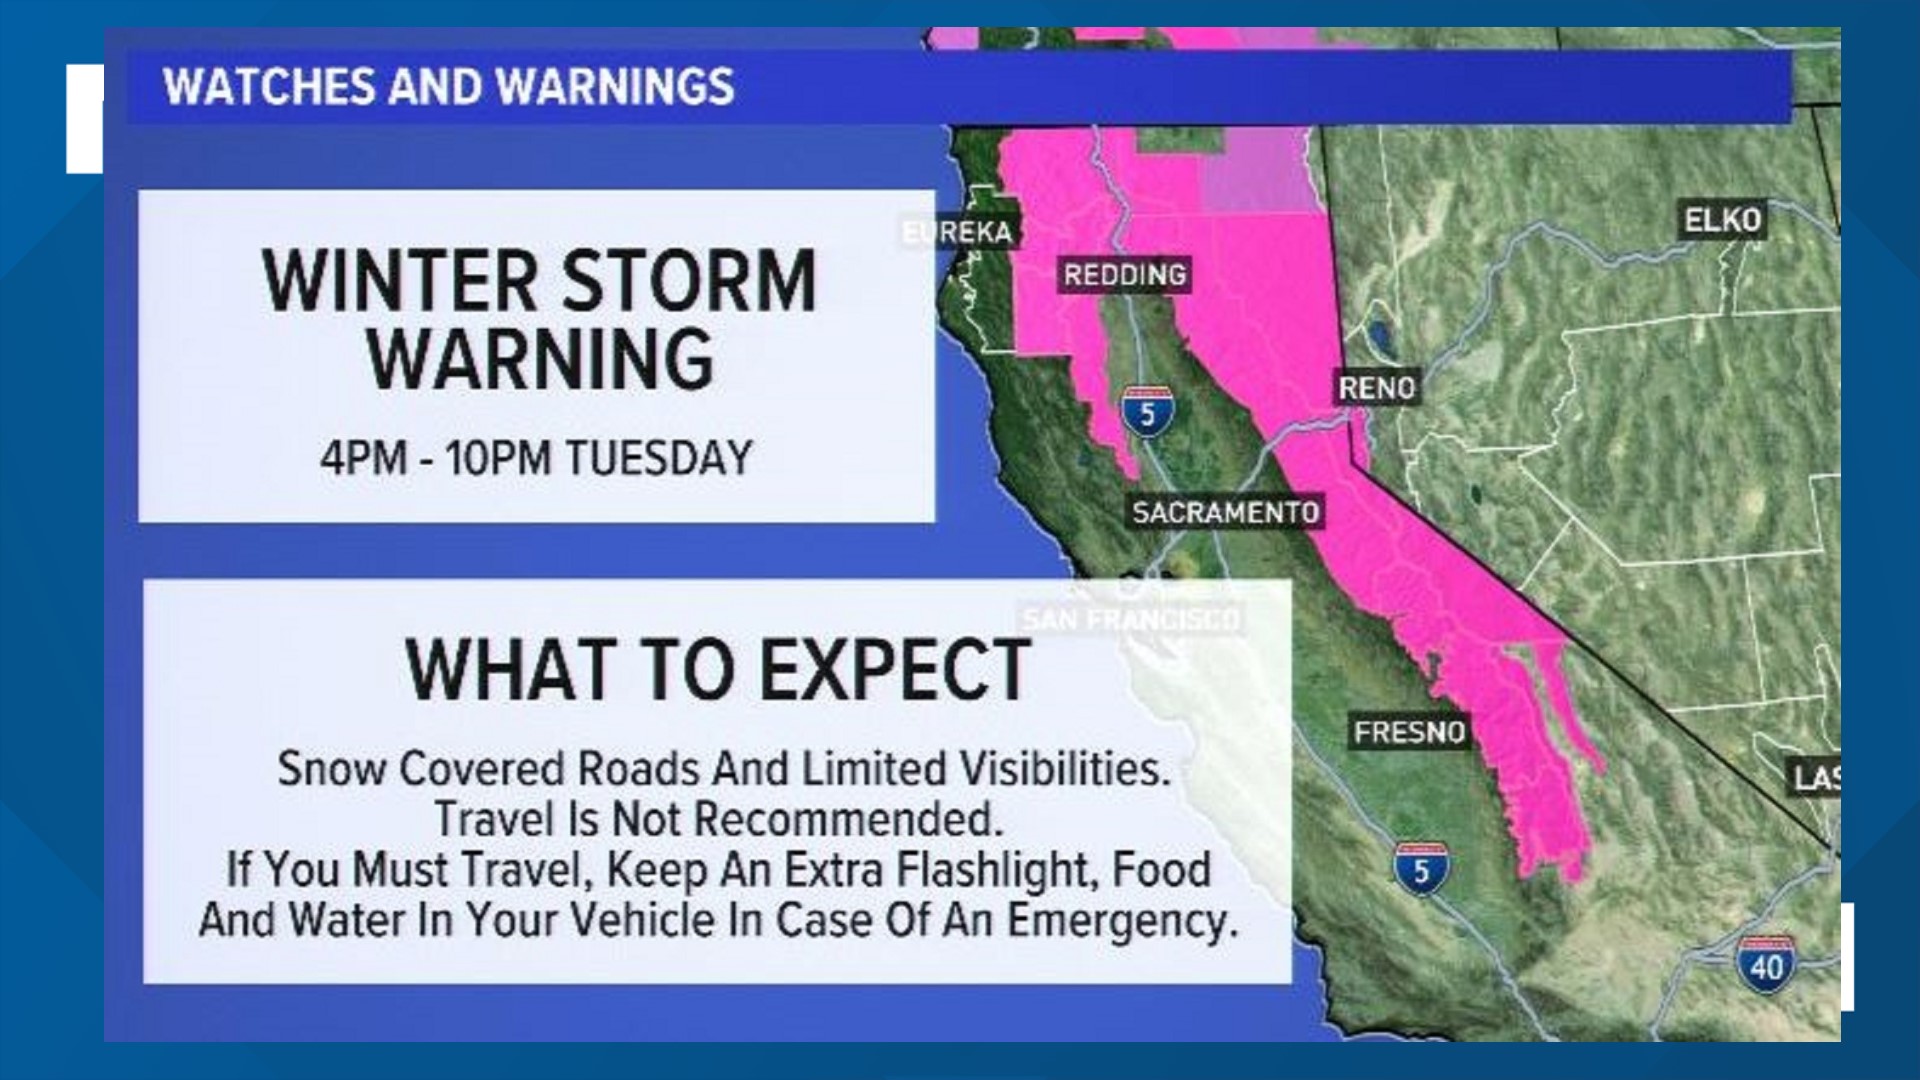 Major travel impacts are expected for the Sierra with strong winds, flooding, and possible power outages for the valley.